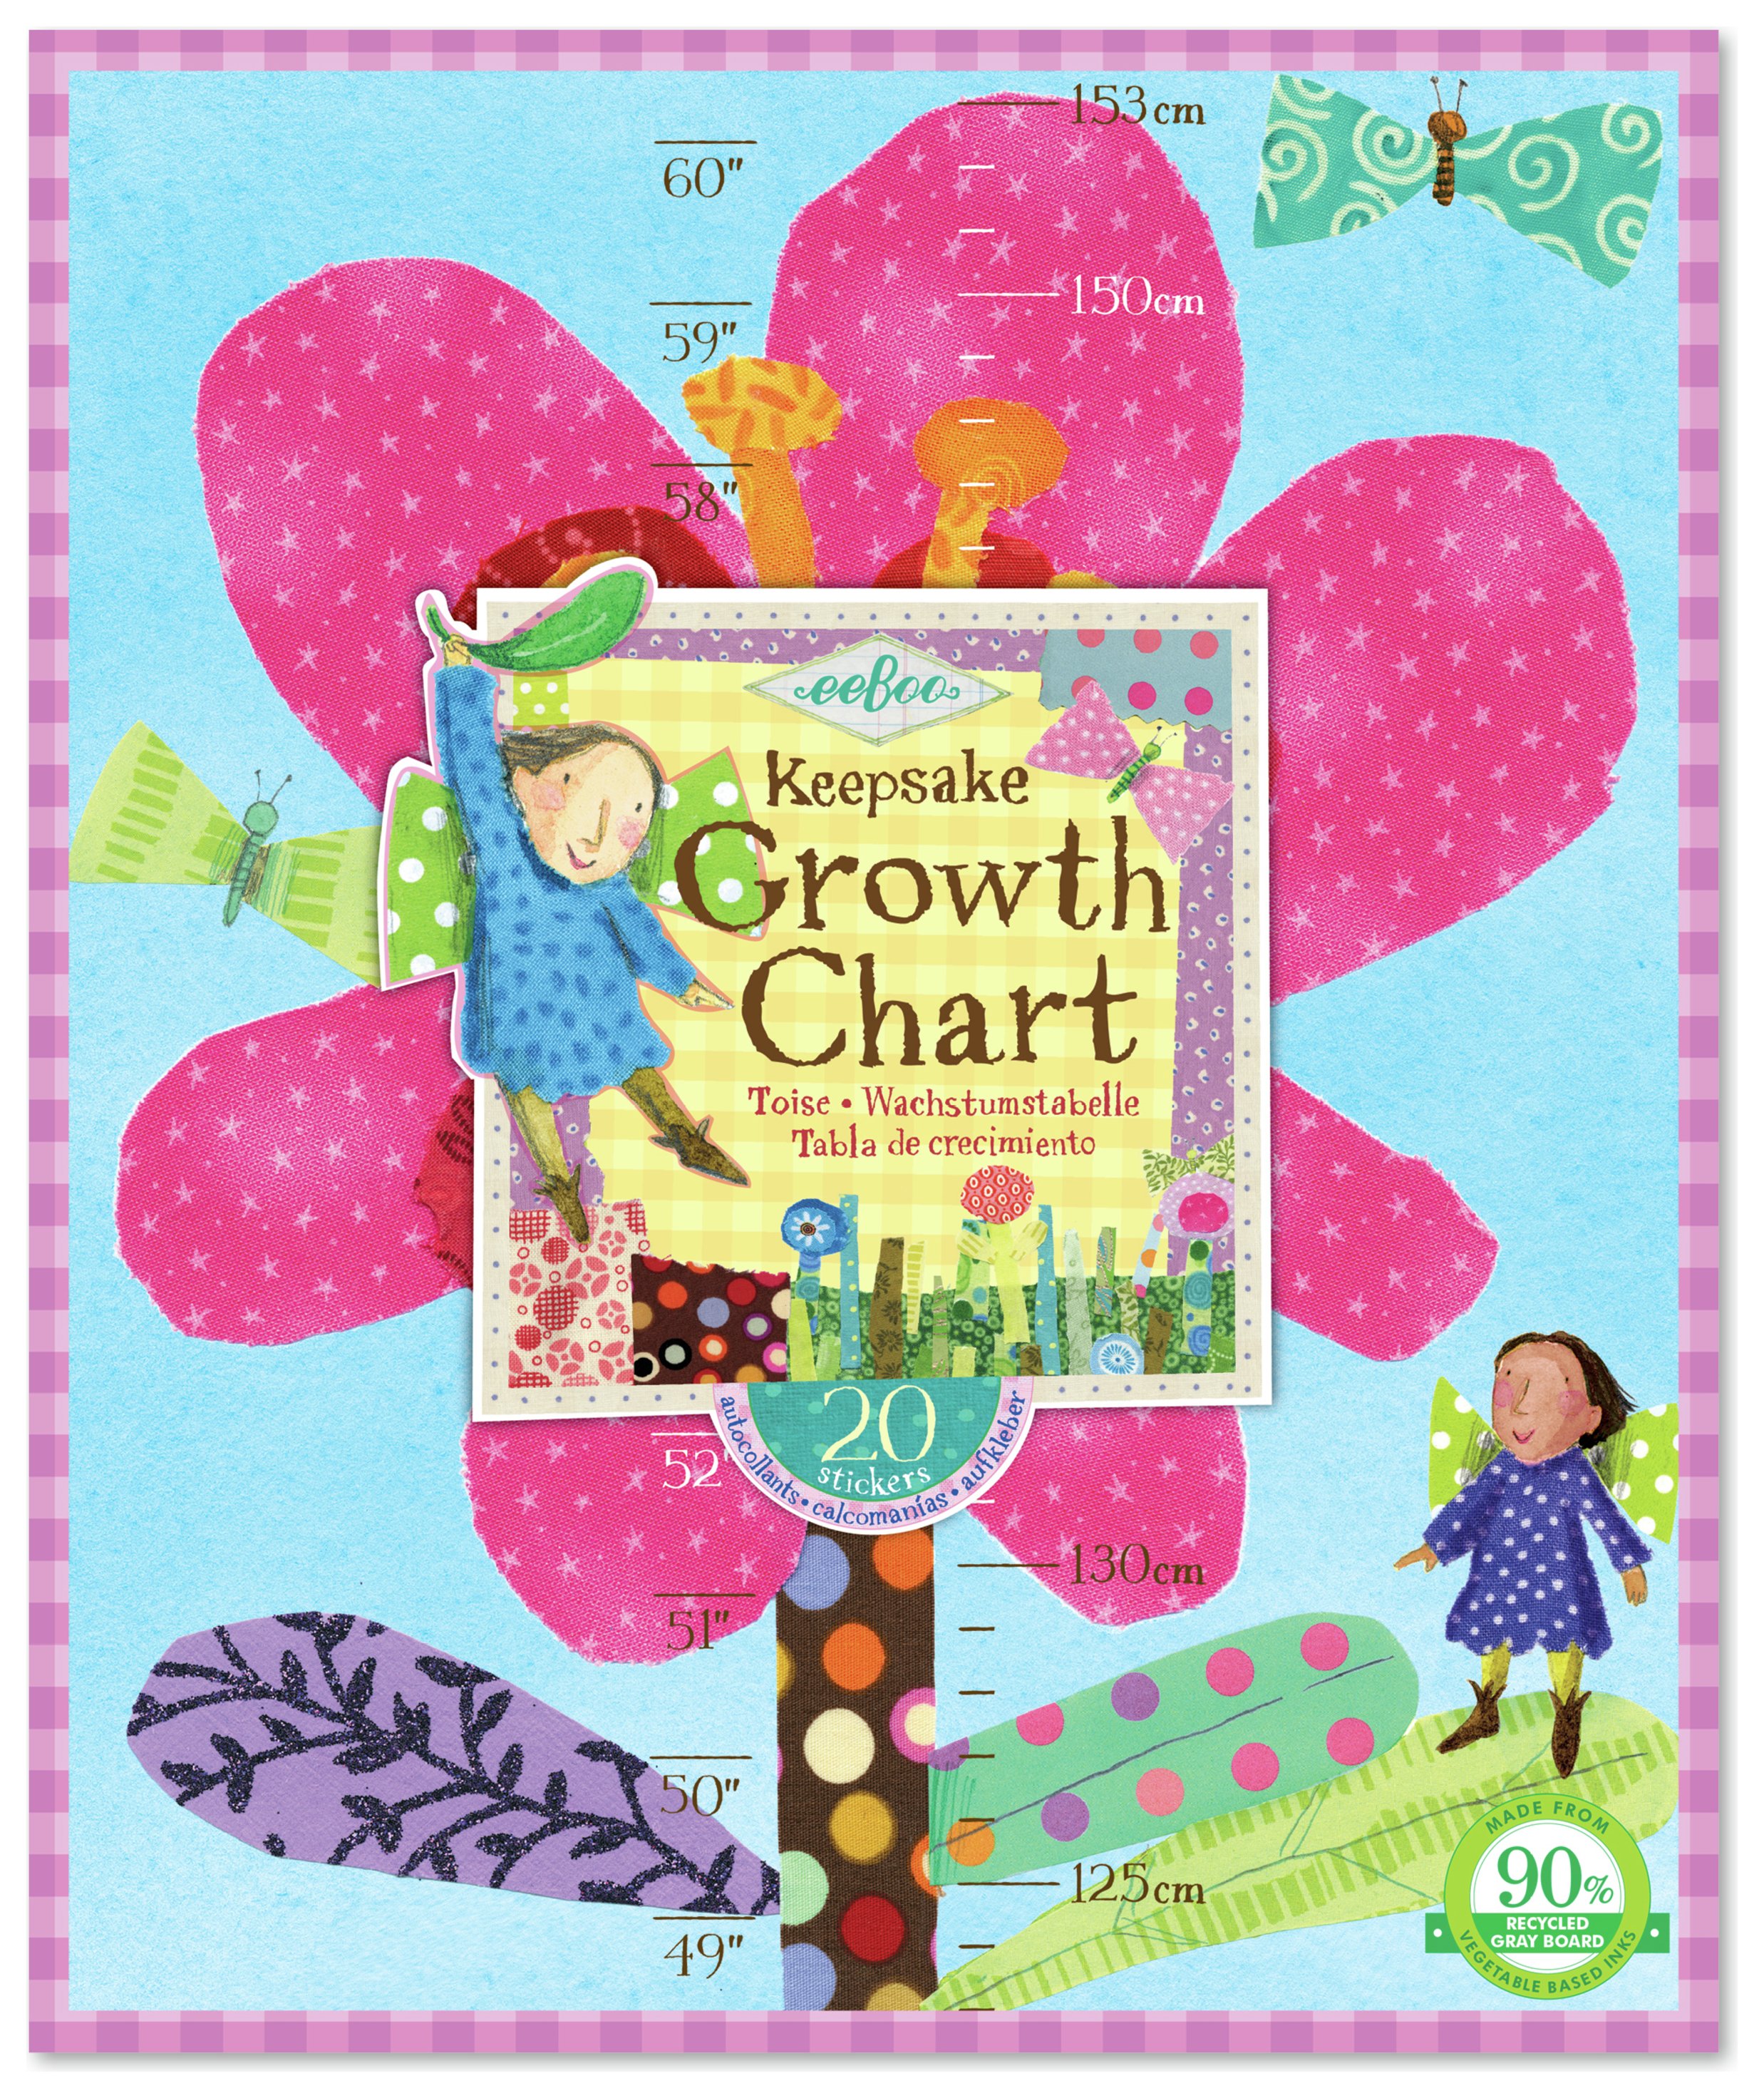 eeBoo Hot Pink Flower Growth Charts. review